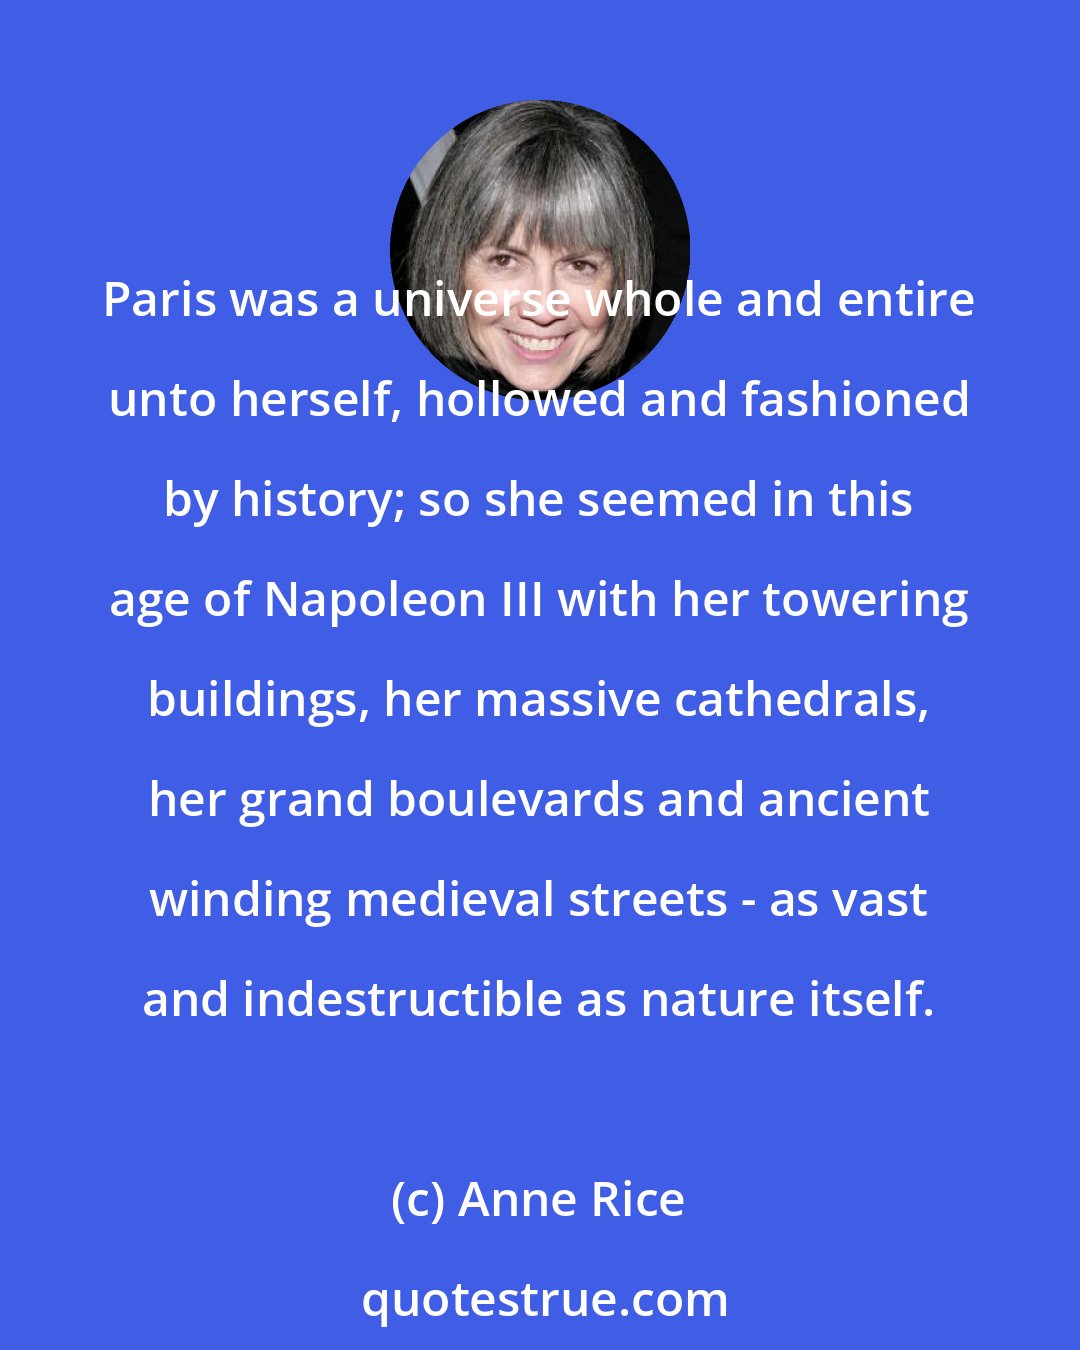 Anne Rice: Paris was a universe whole and entire unto herself, hollowed and fashioned by history; so she seemed in this age of Napoleon III with her towering buildings, her massive cathedrals, her grand boulevards and ancient winding medieval streets - as vast and indestructible as nature itself.